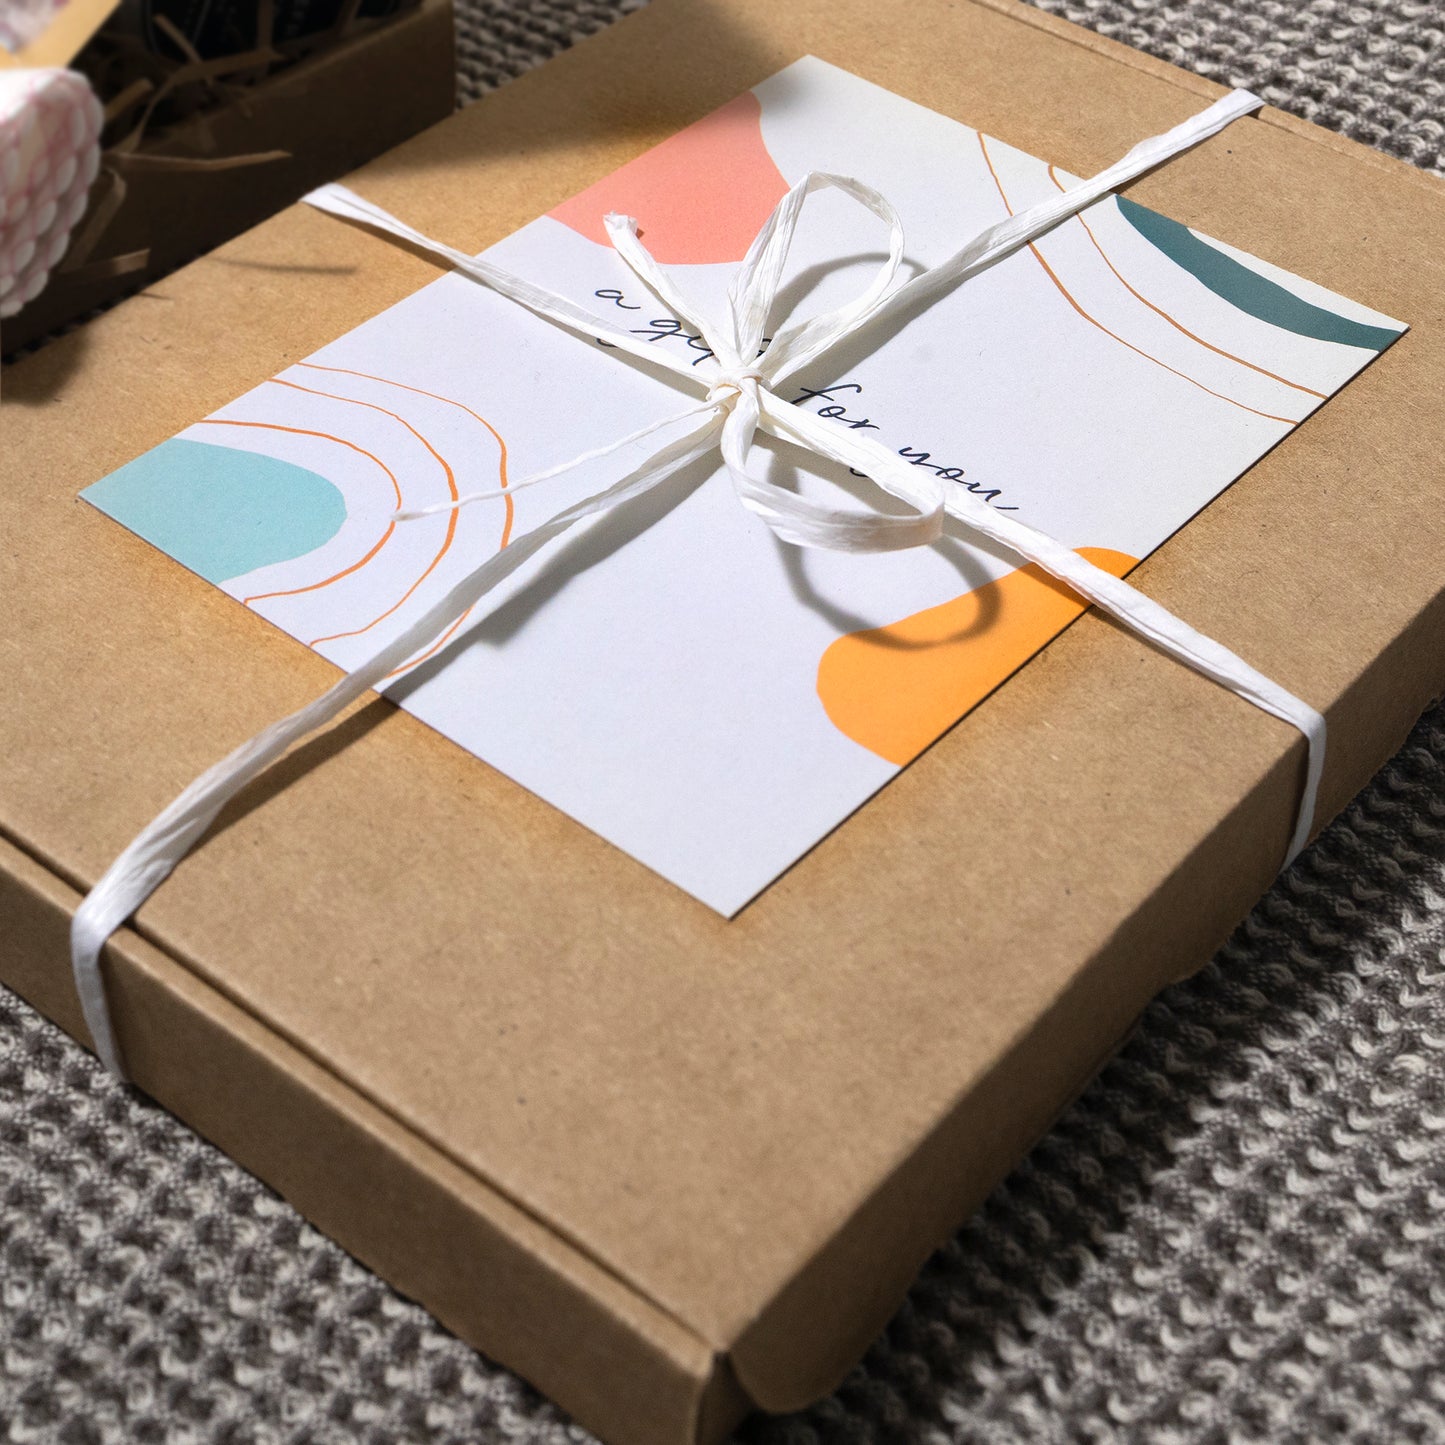 brown cardboard box with white ribbon and white greetings card with abstract colorful shapes printed on it, on a grey material surface